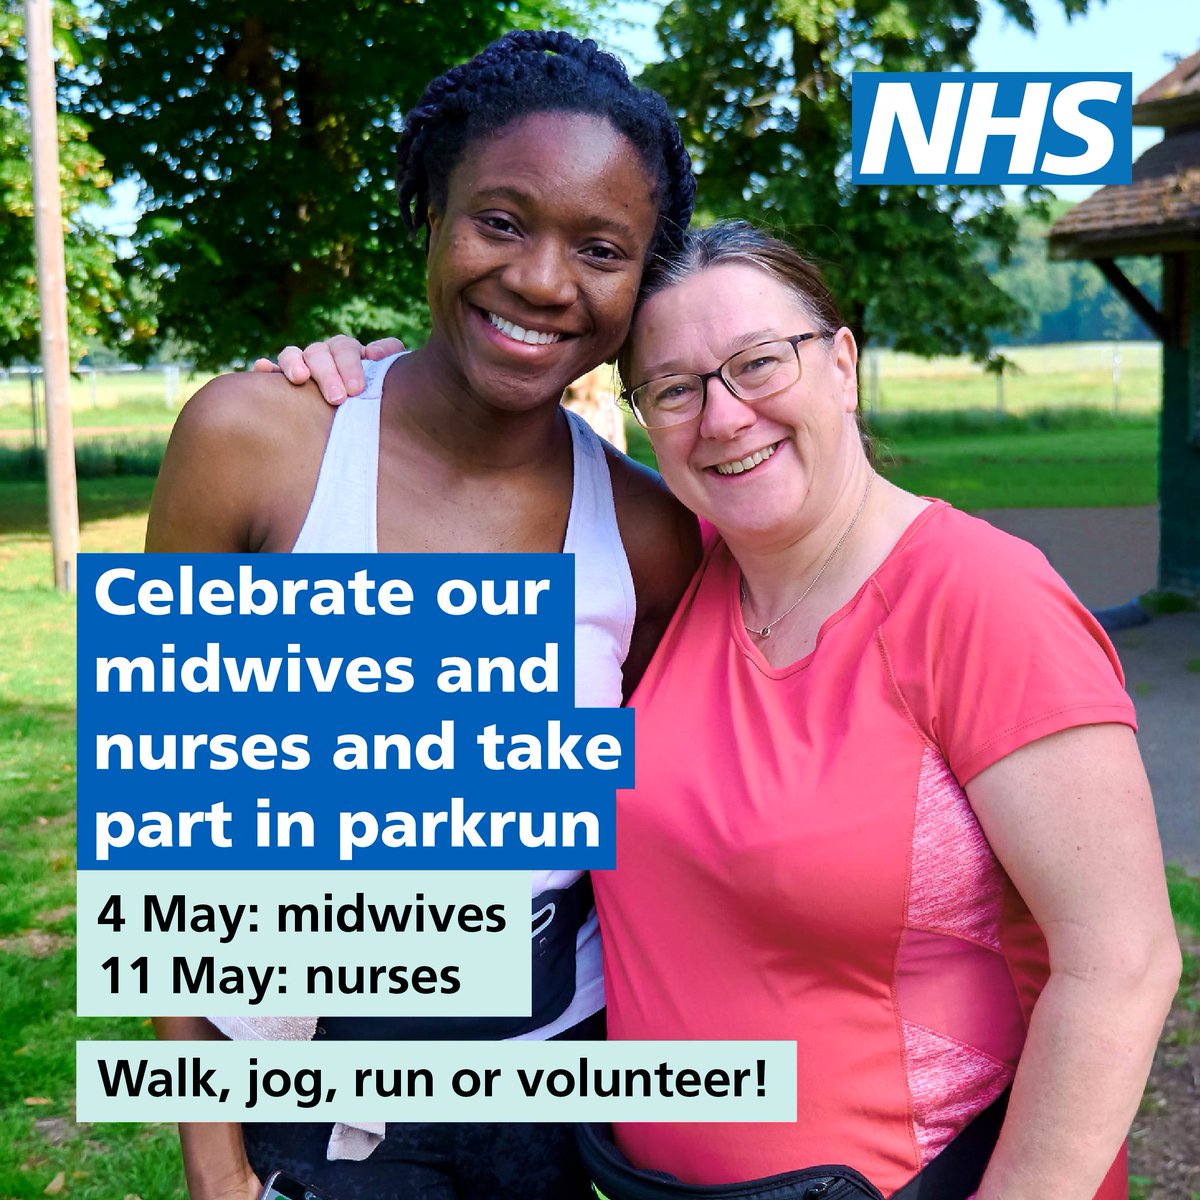 Take part in a local @parkrunUK event on 4 May to mark International Day of the Midwife #IDM2024 and 11 May for International Nurses Day #IND2024. You can walk, jog, run or volunteer as we recognise and thank our #teamCMidO midwives and #teamCNO nurses. orlo.uk/iE62p